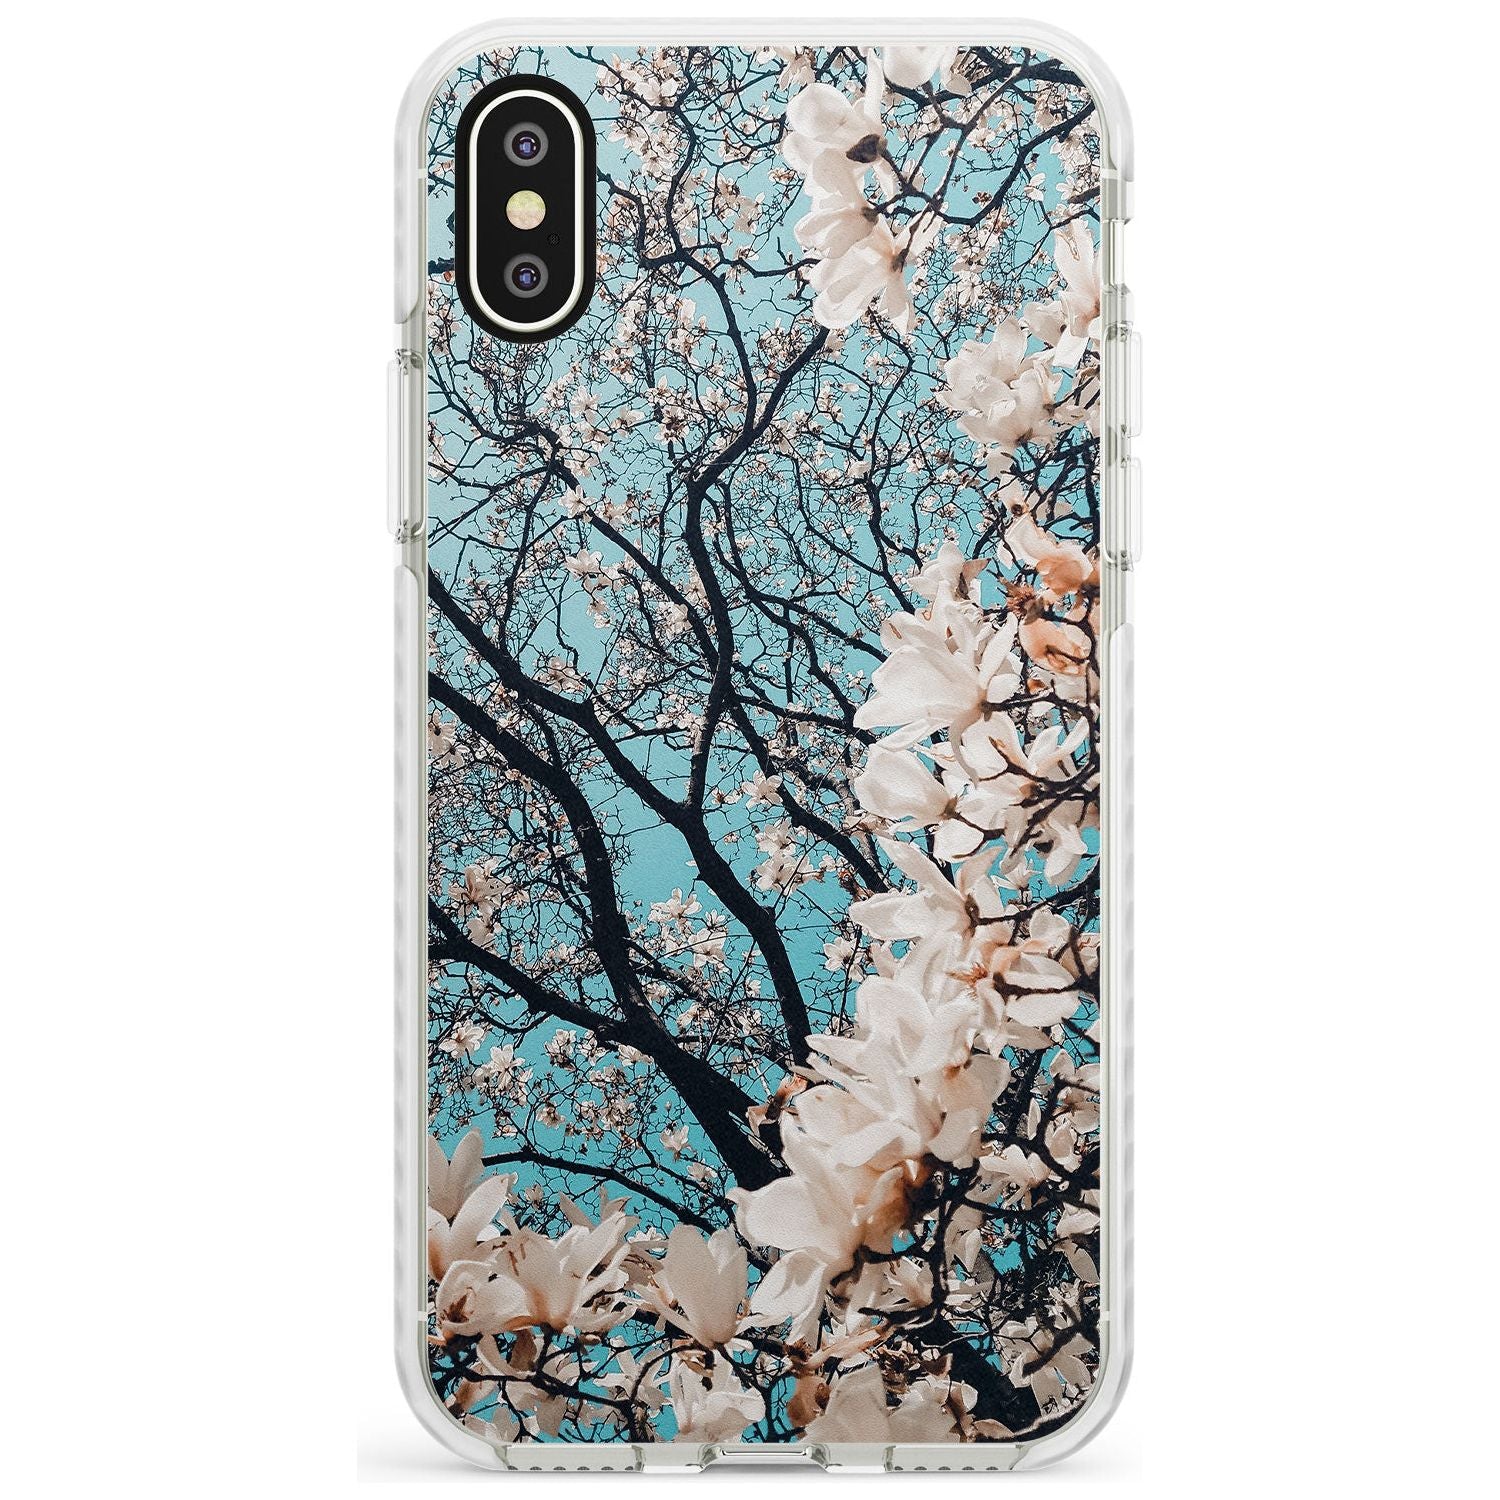 Magnolia Tree Photograph Impact Phone Case for iPhone X XS Max XR